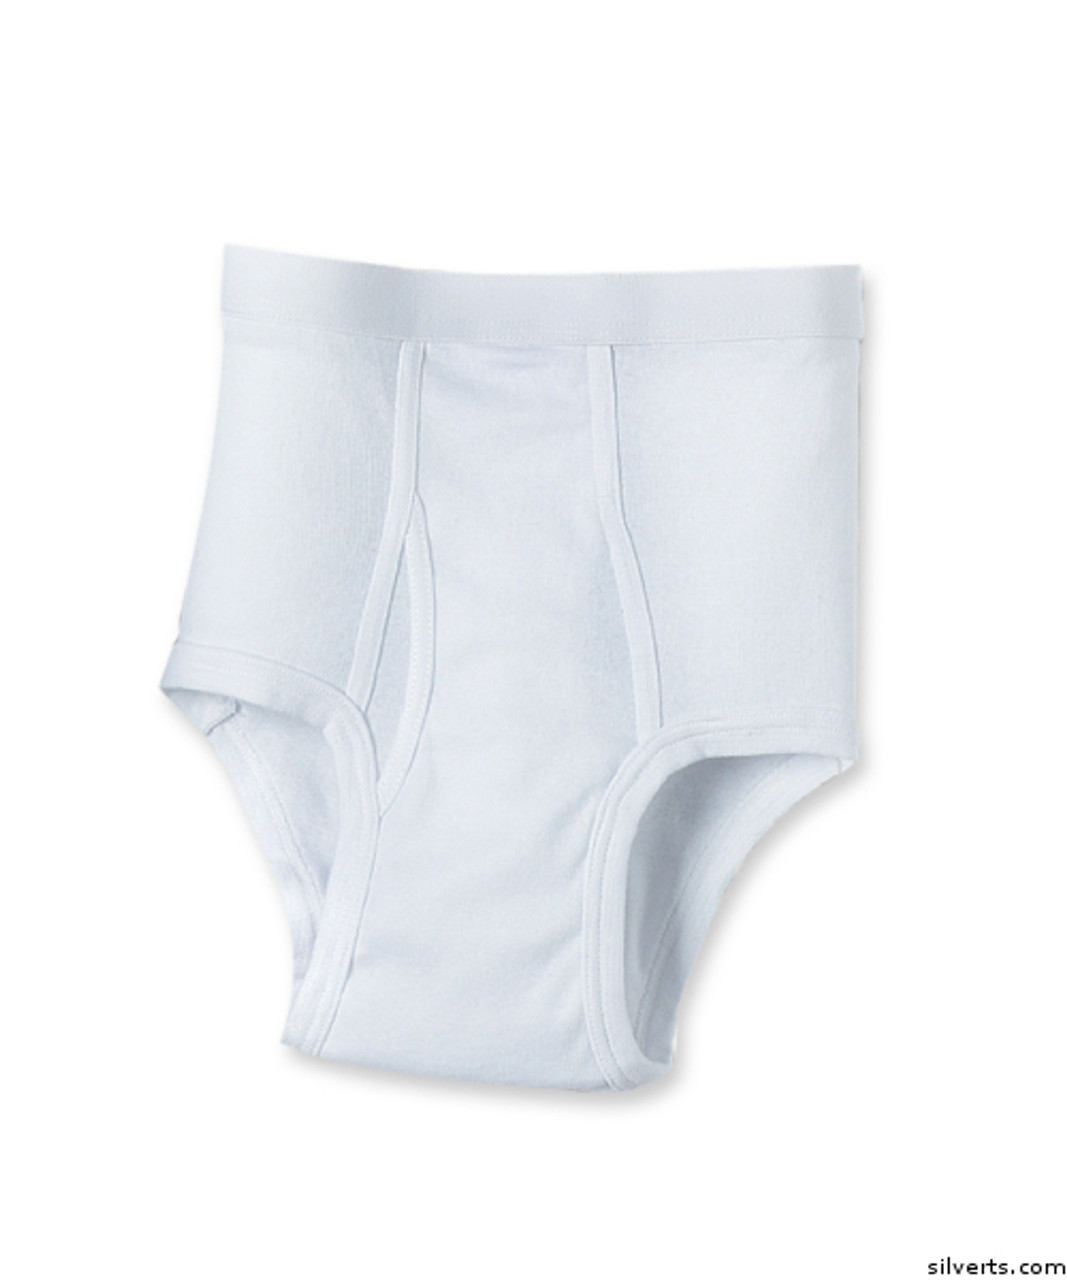 Lining Solid Men's Cotton Brief, Size: 75-110 cm at best price in